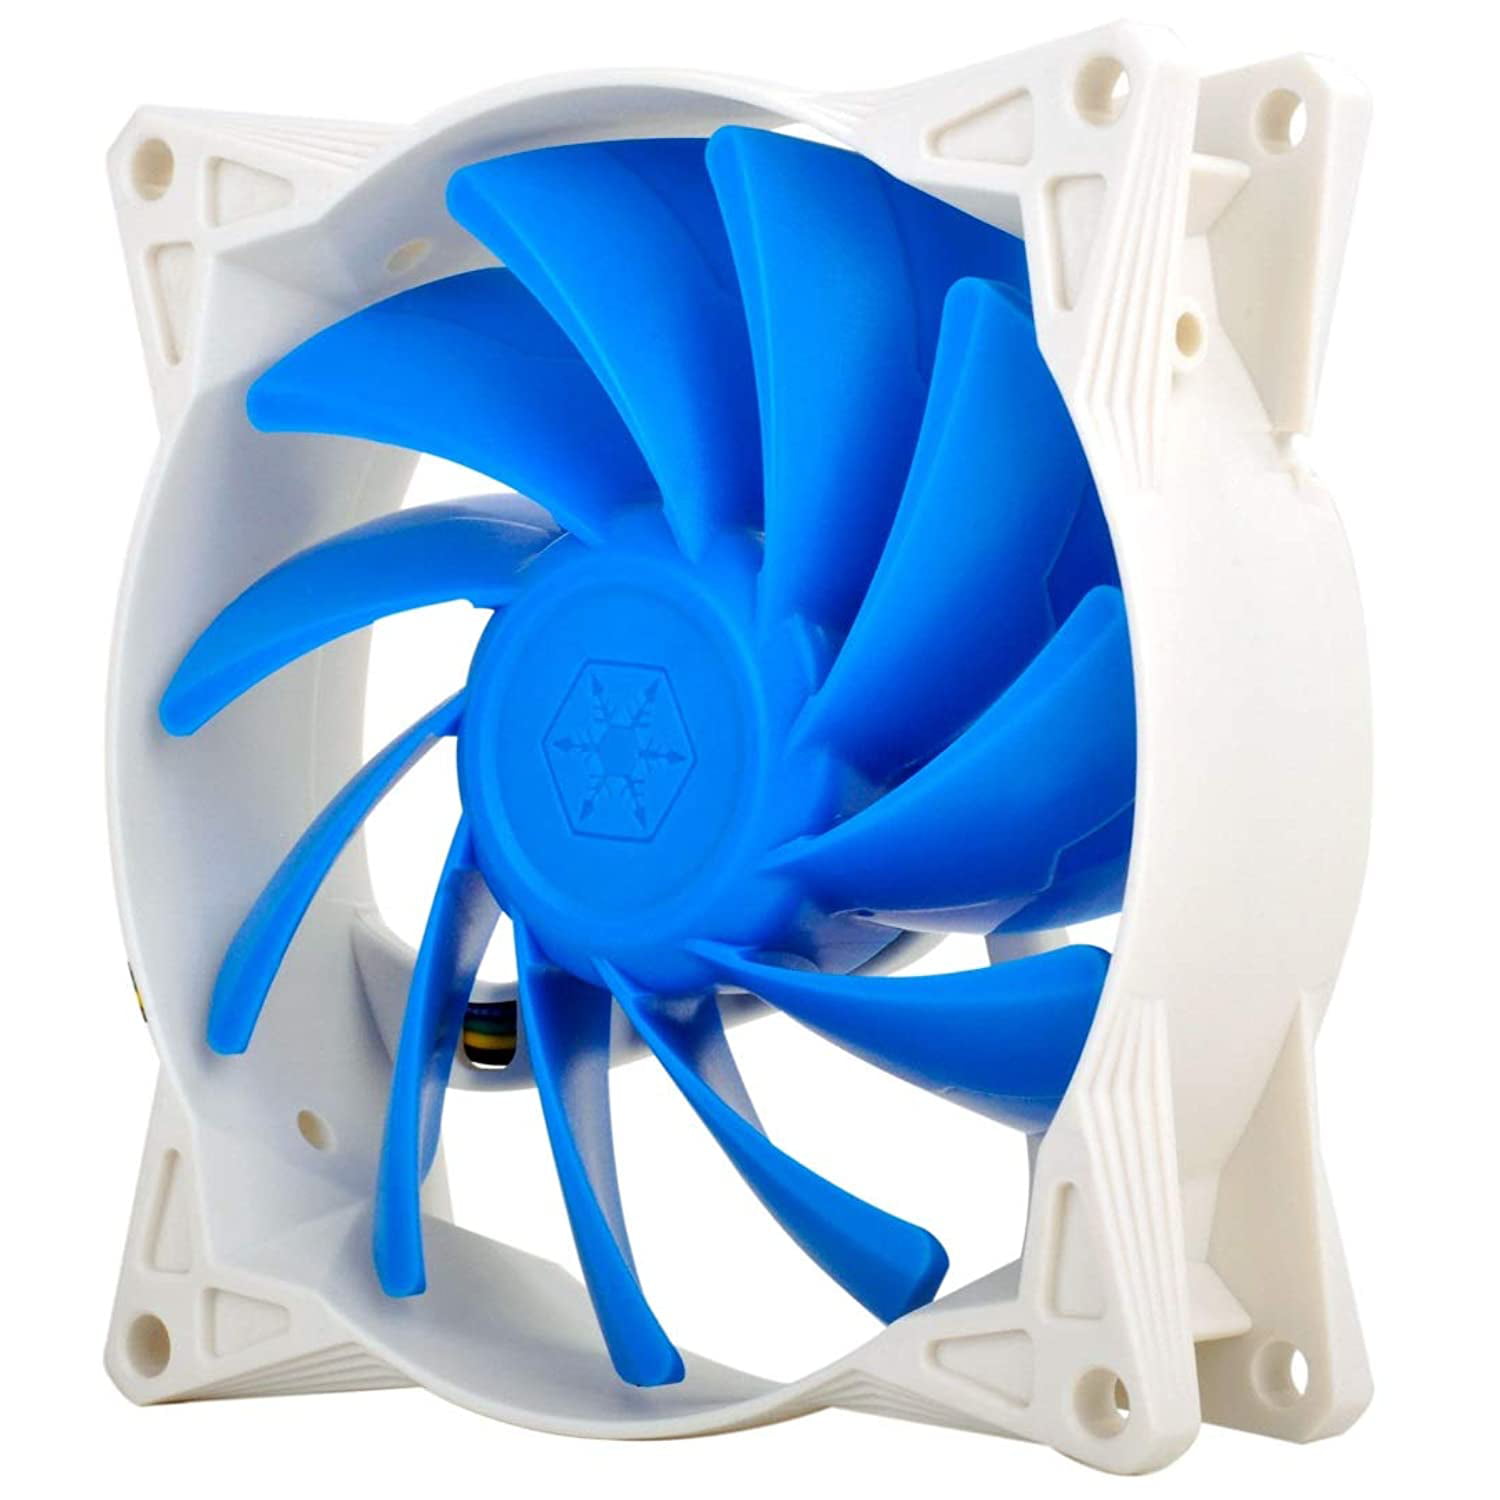 Silverstone Tek 92mm Ultra-Quiet PWM Fan with Anti-Vibration Rubber Pads Cooling FQ91